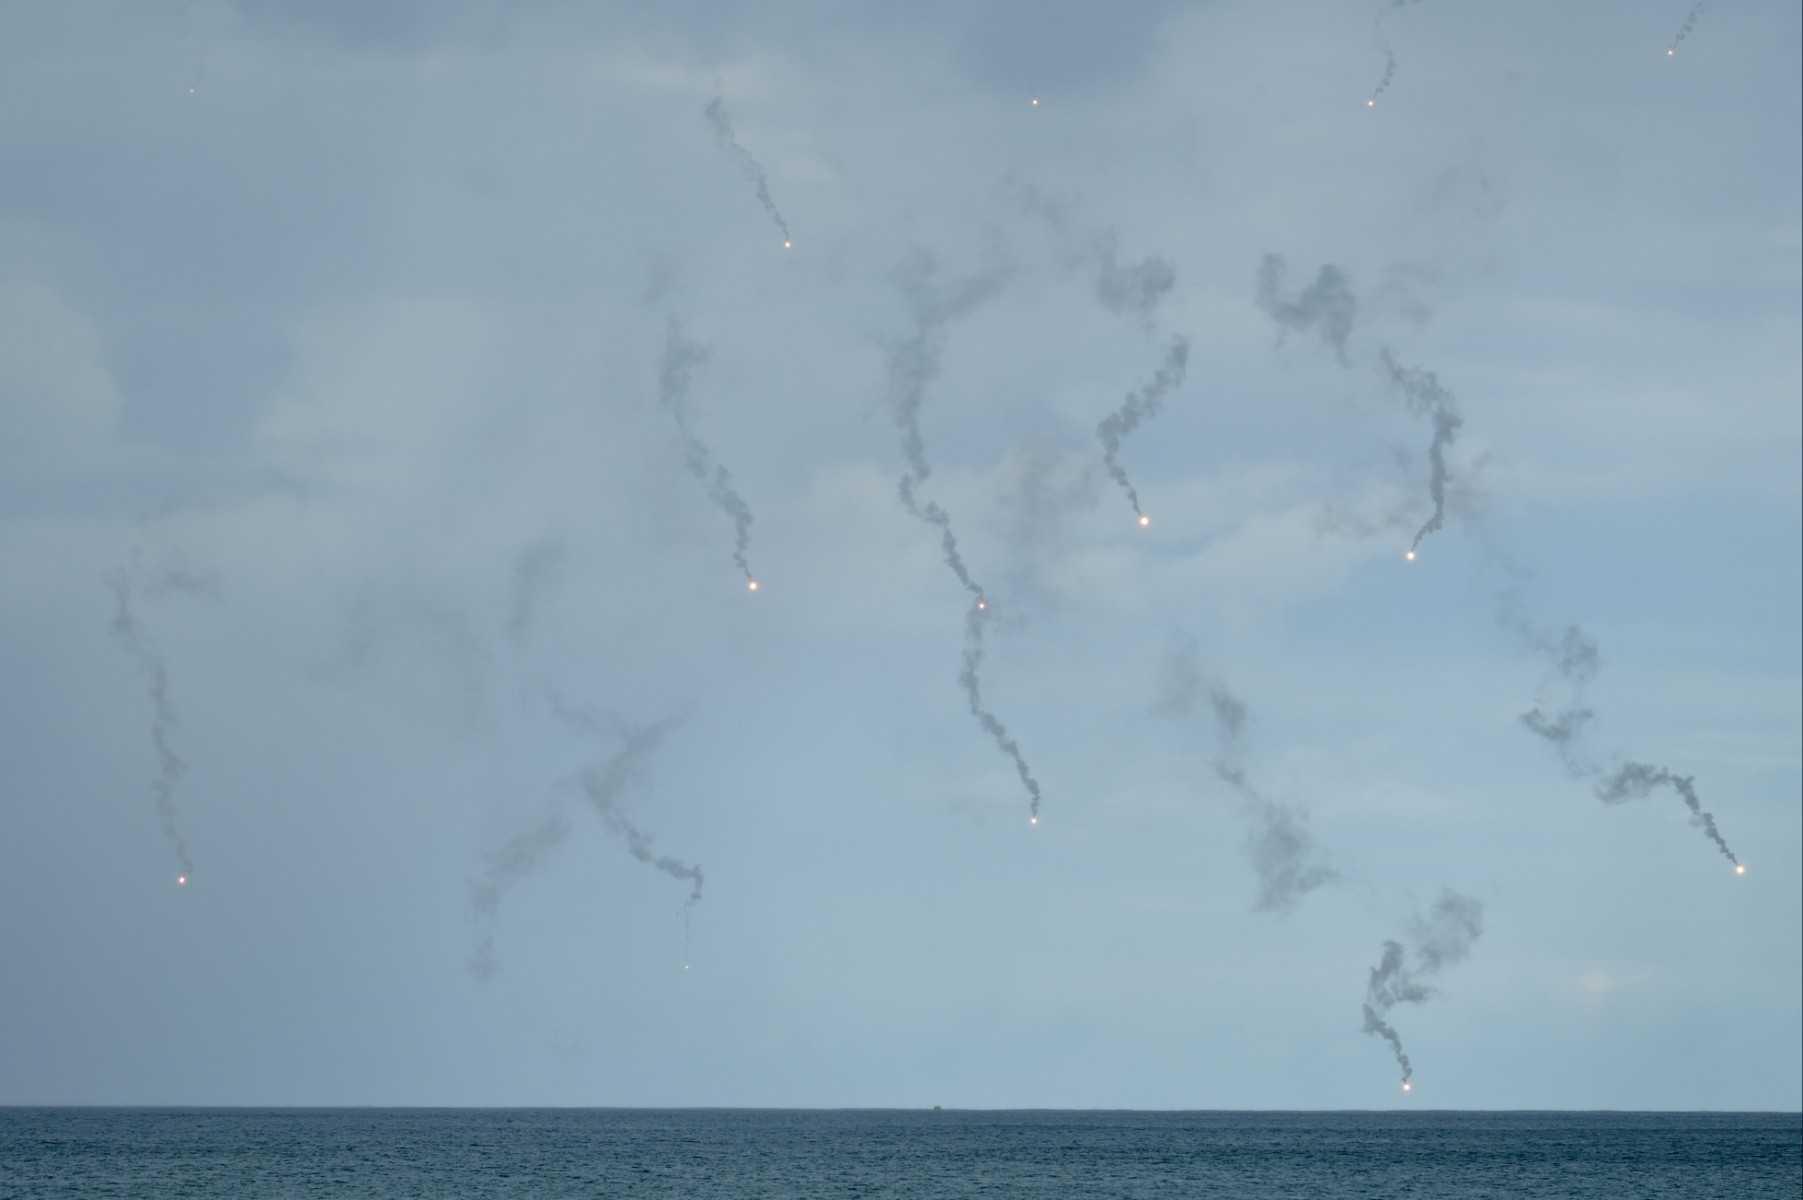 Taiwan military soldiers fire flares during a live fire anti-landing drill in the Pingtung county, southern Taiwan on Aug 9. Photo: AFP